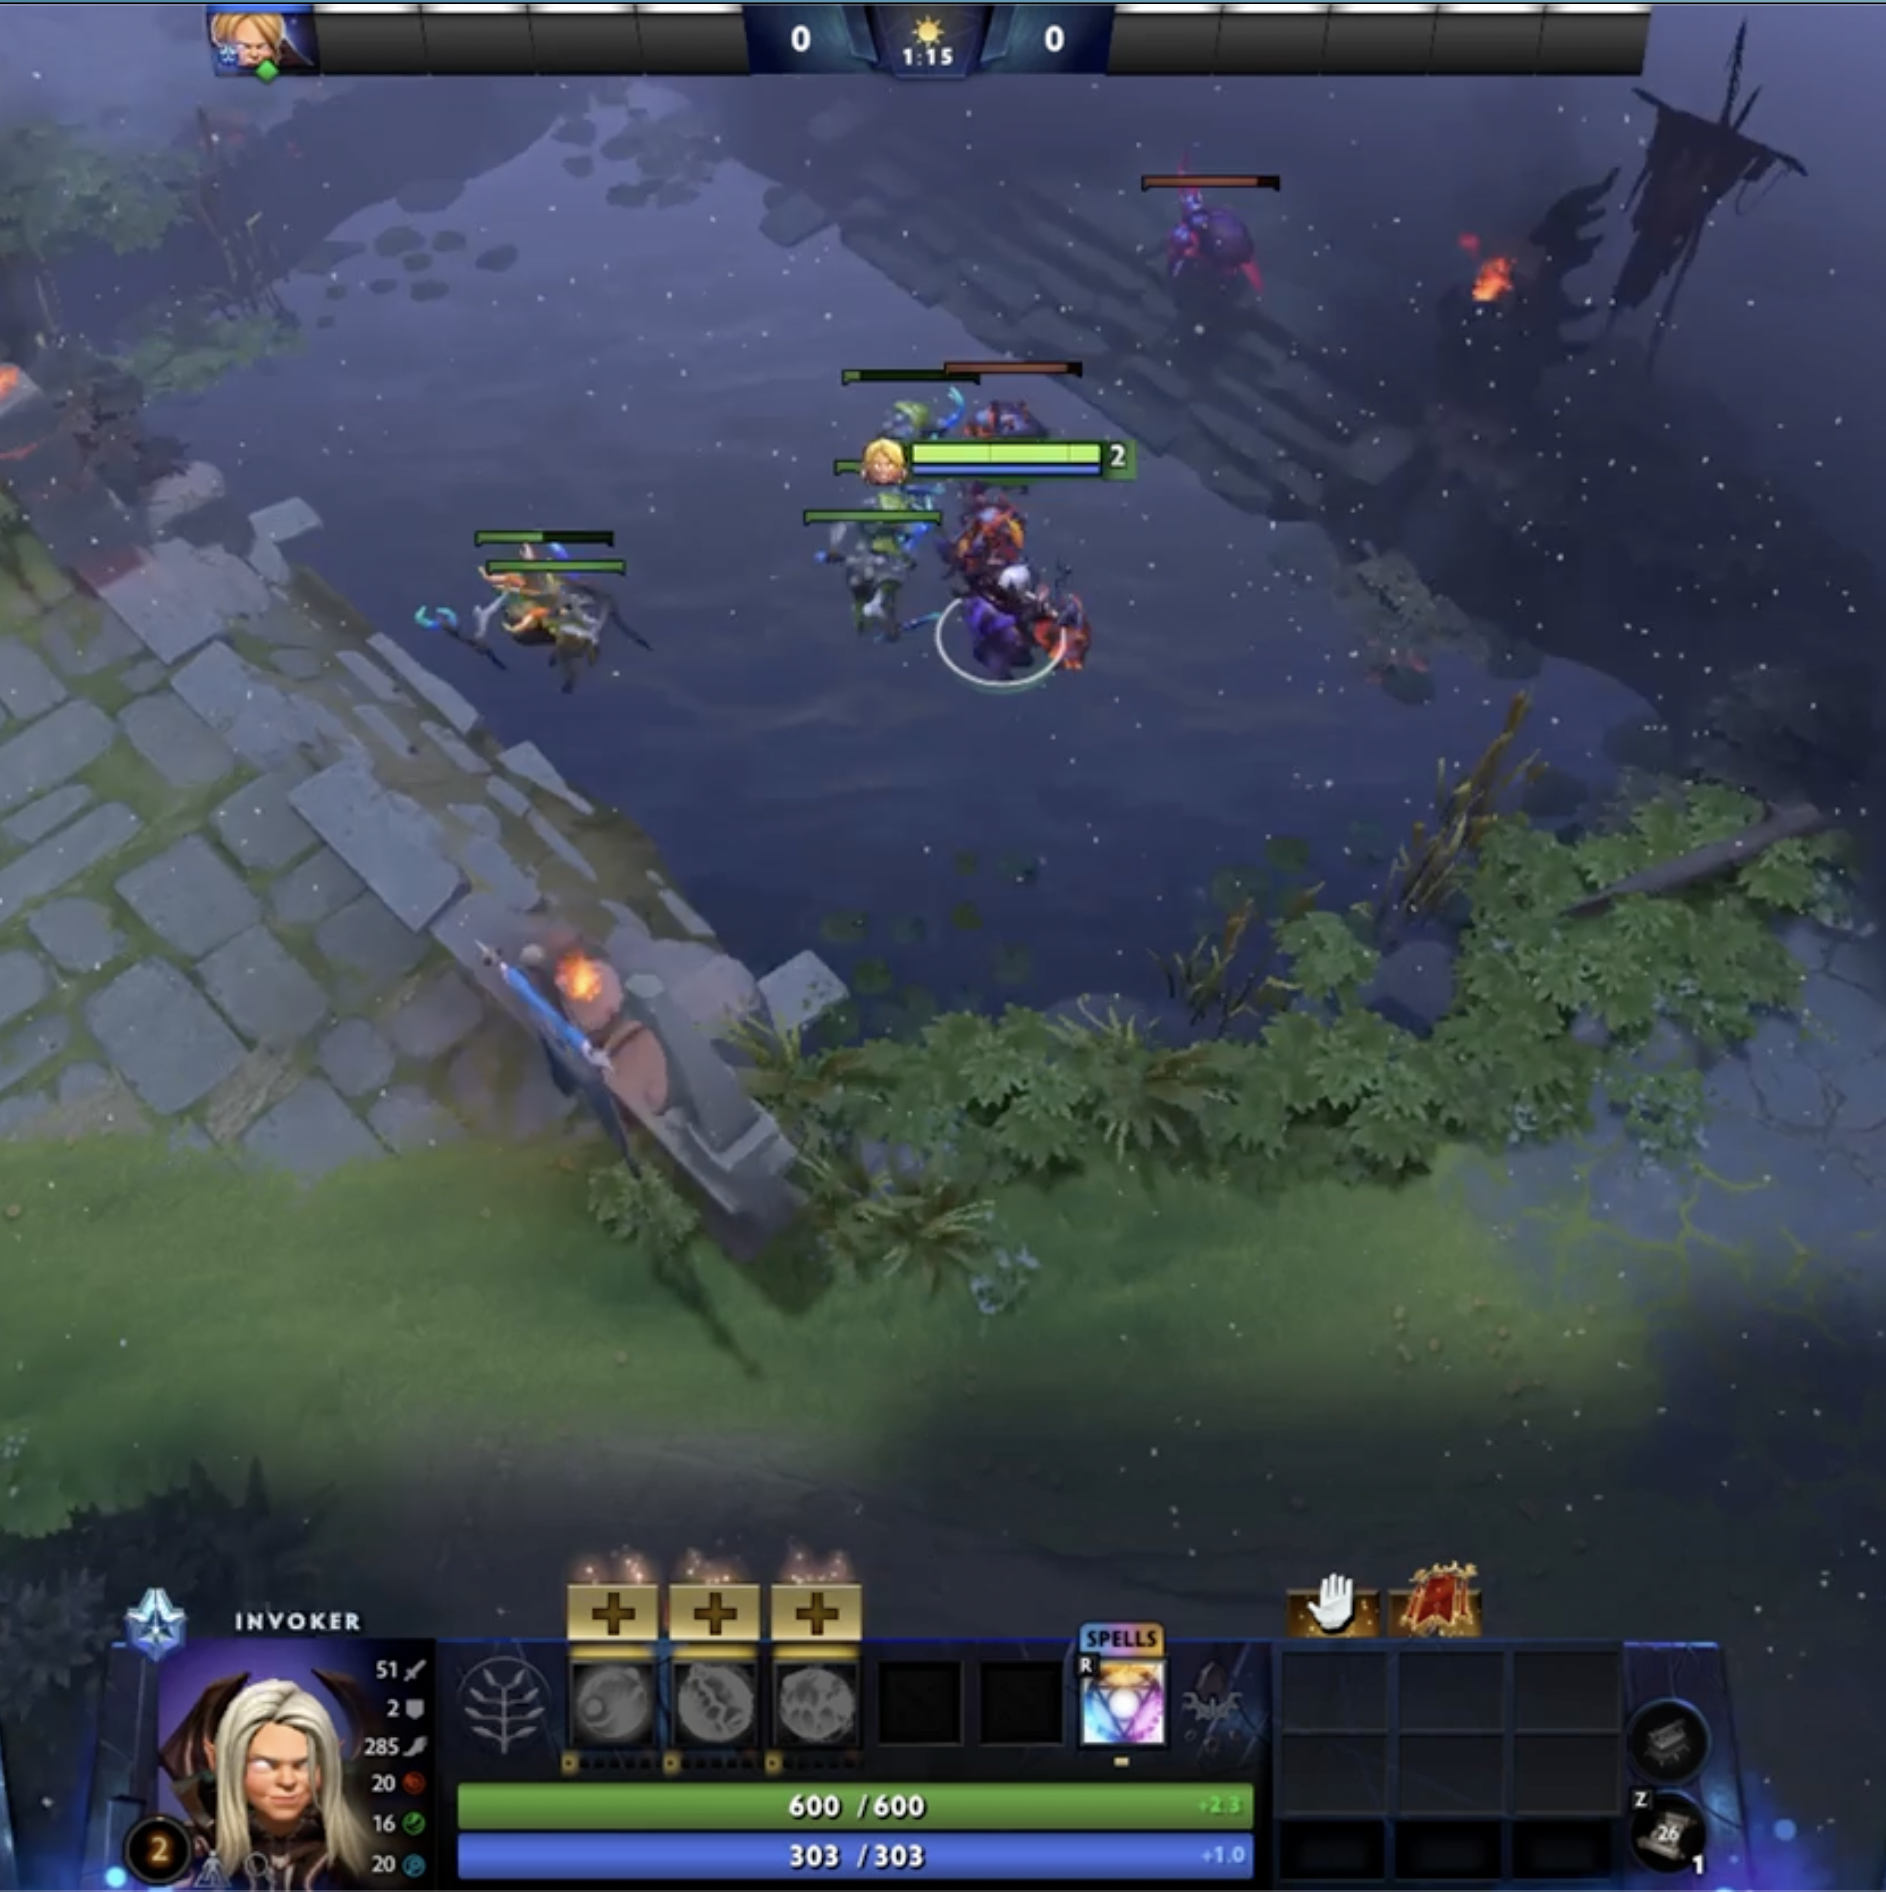 Camera's independence from the avatar in Dota2